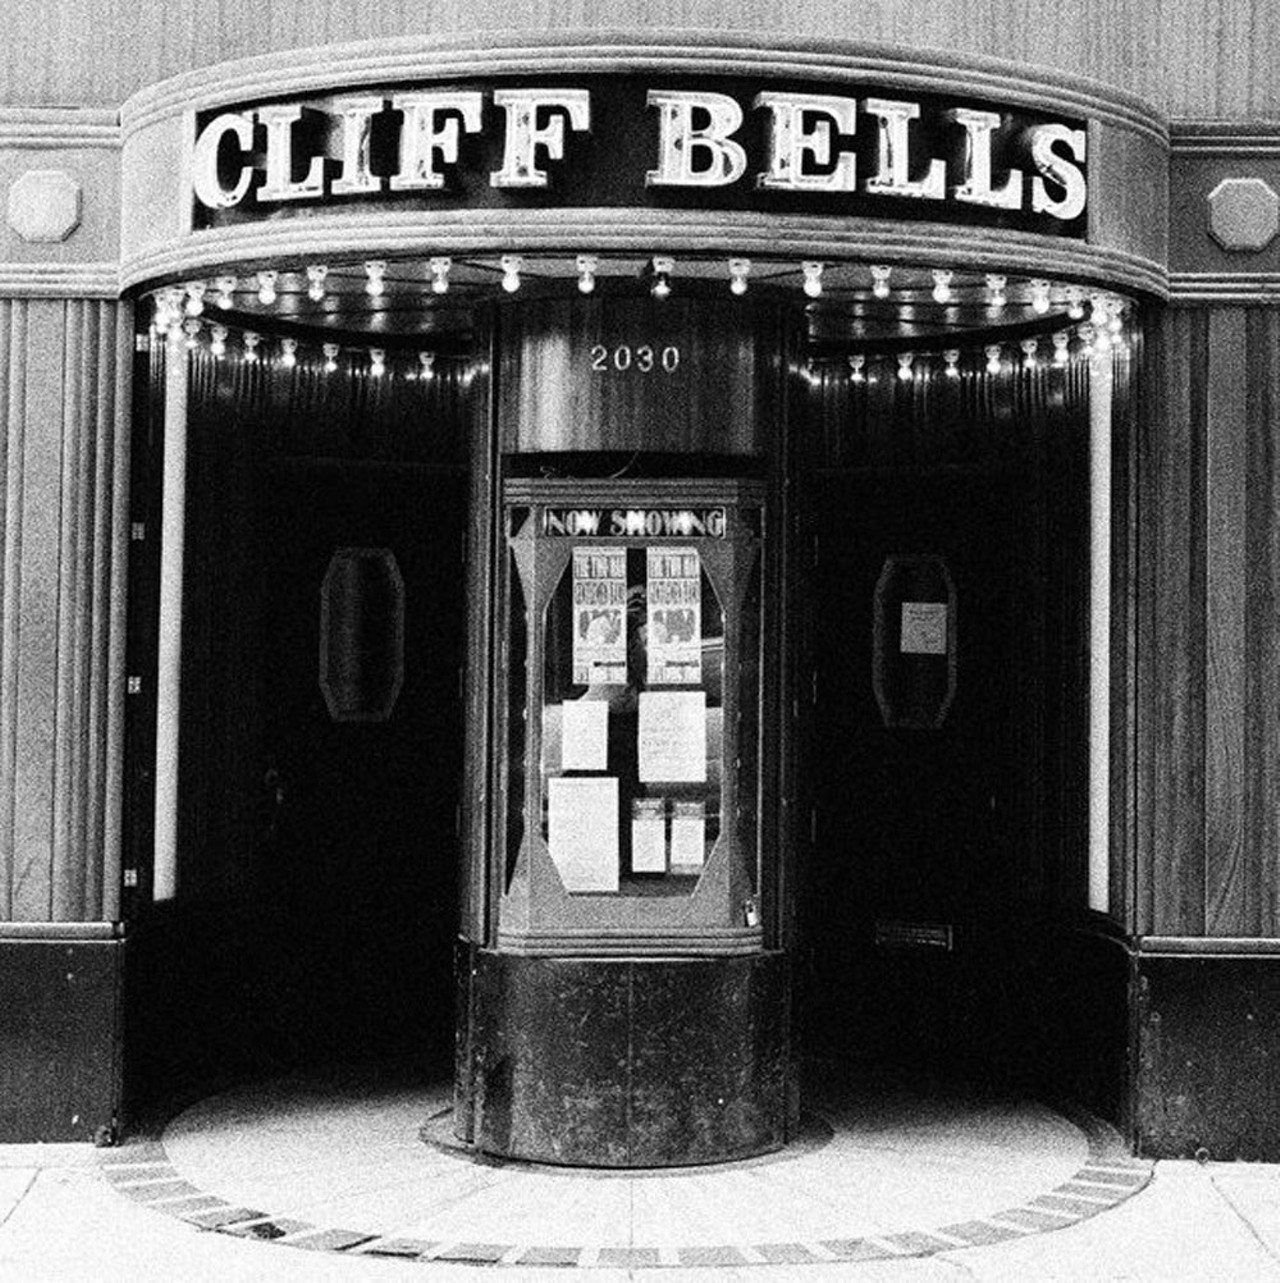 Cliff Bell&#146;s
2030 Park Ave, Detroit
(313)-961-2543
Sure, this may not be the place to go if you want some peace and quiet, but the sweet jazz that plays at this famous Detroit bar will drown out the fellow bar guests so you can think to yourself and hear glorious music. Order a dirty vodka martini and forget all your troubles.